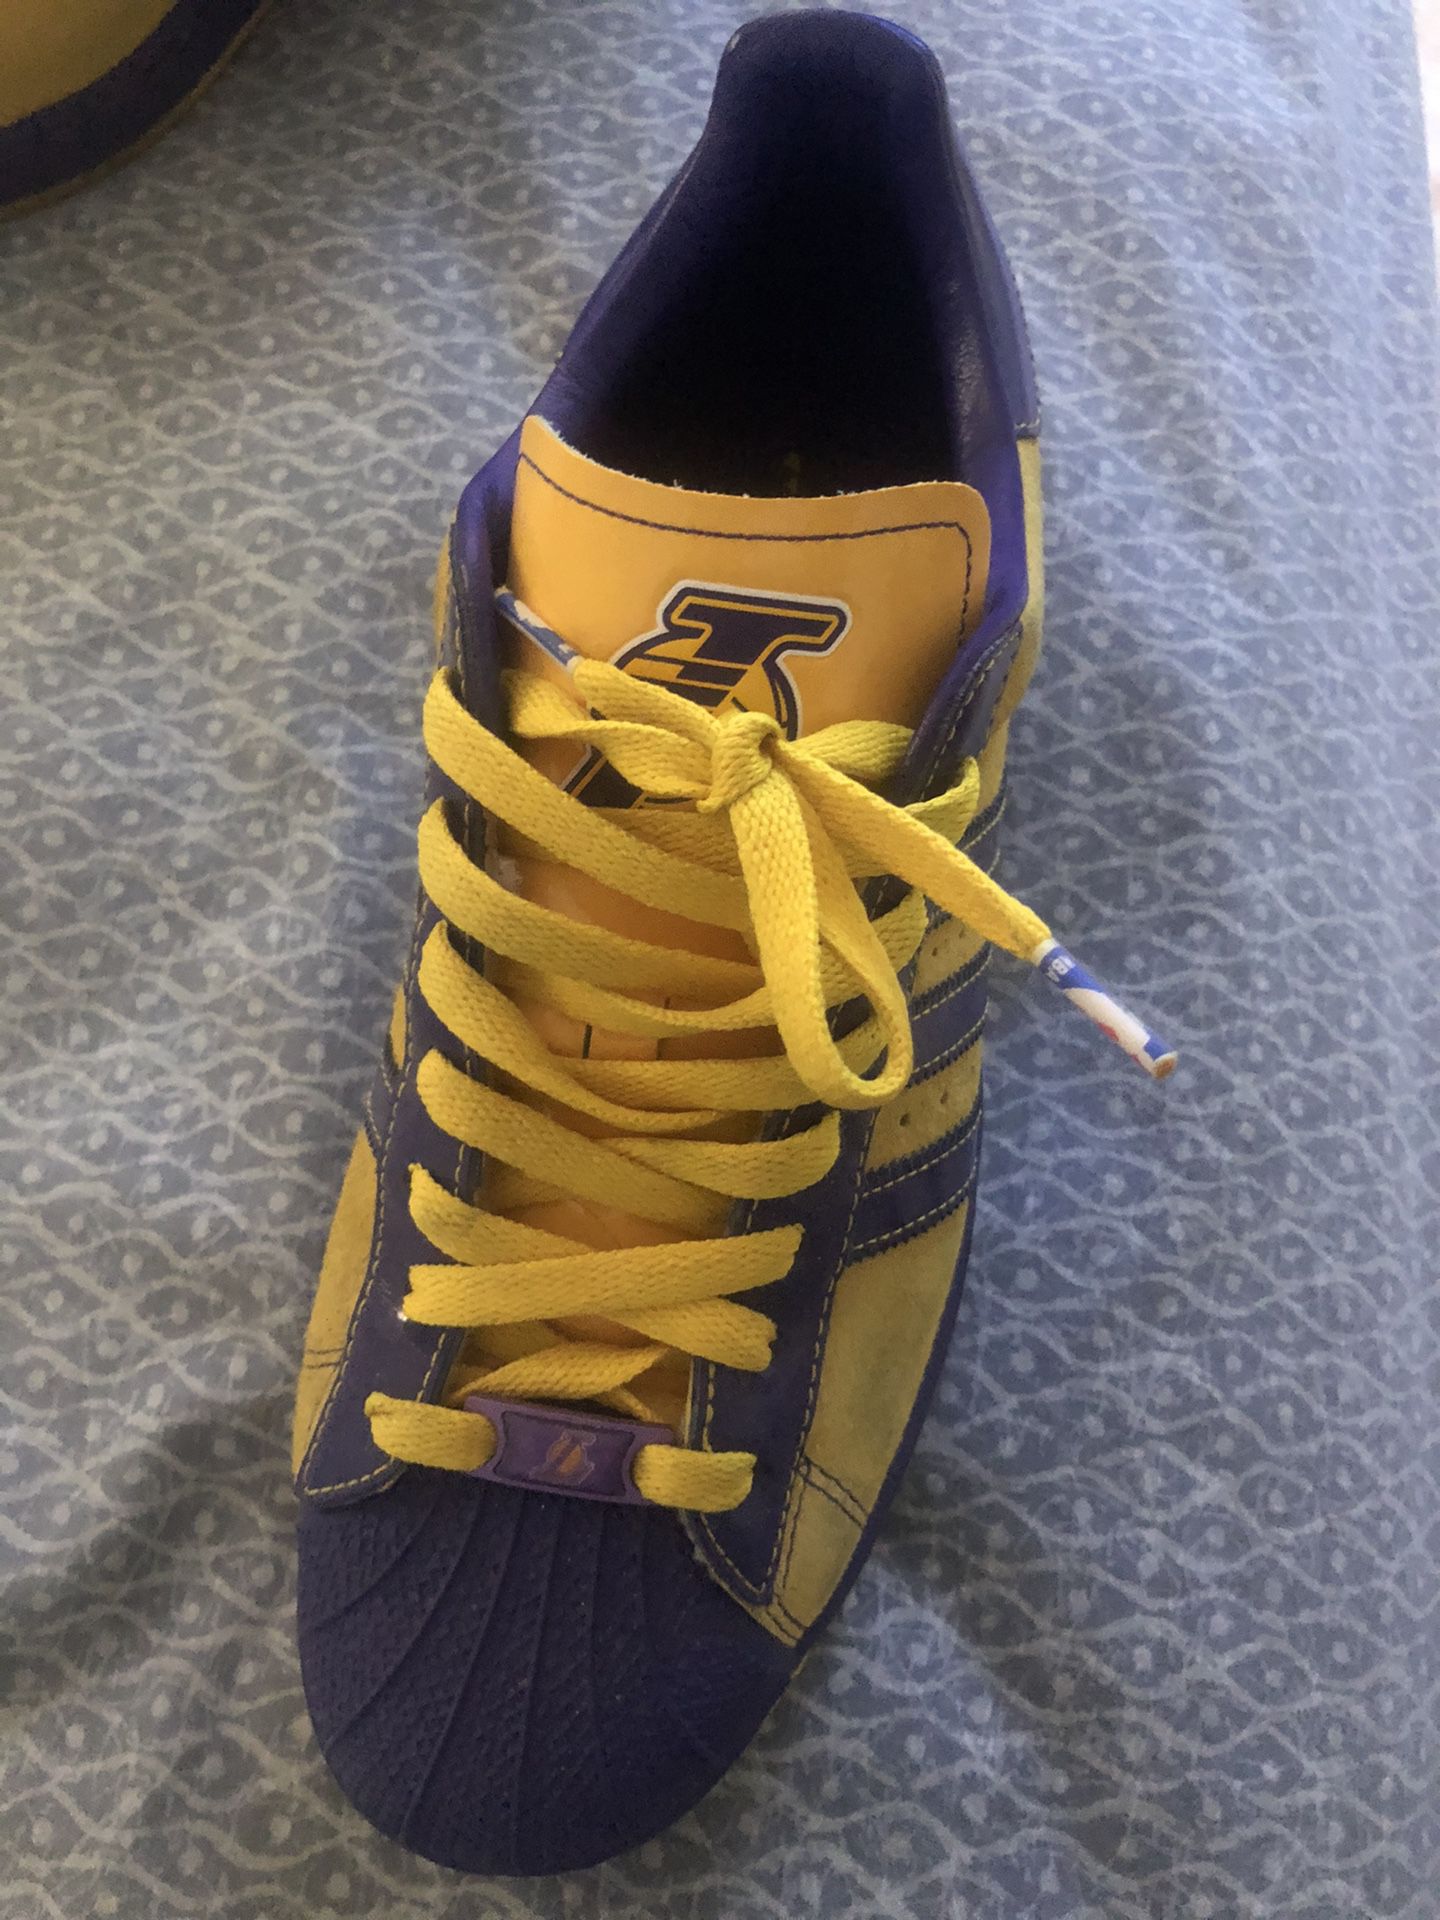 Adidas Superstar Los Angeles Lakers size 9 for Sale in Las Vegas